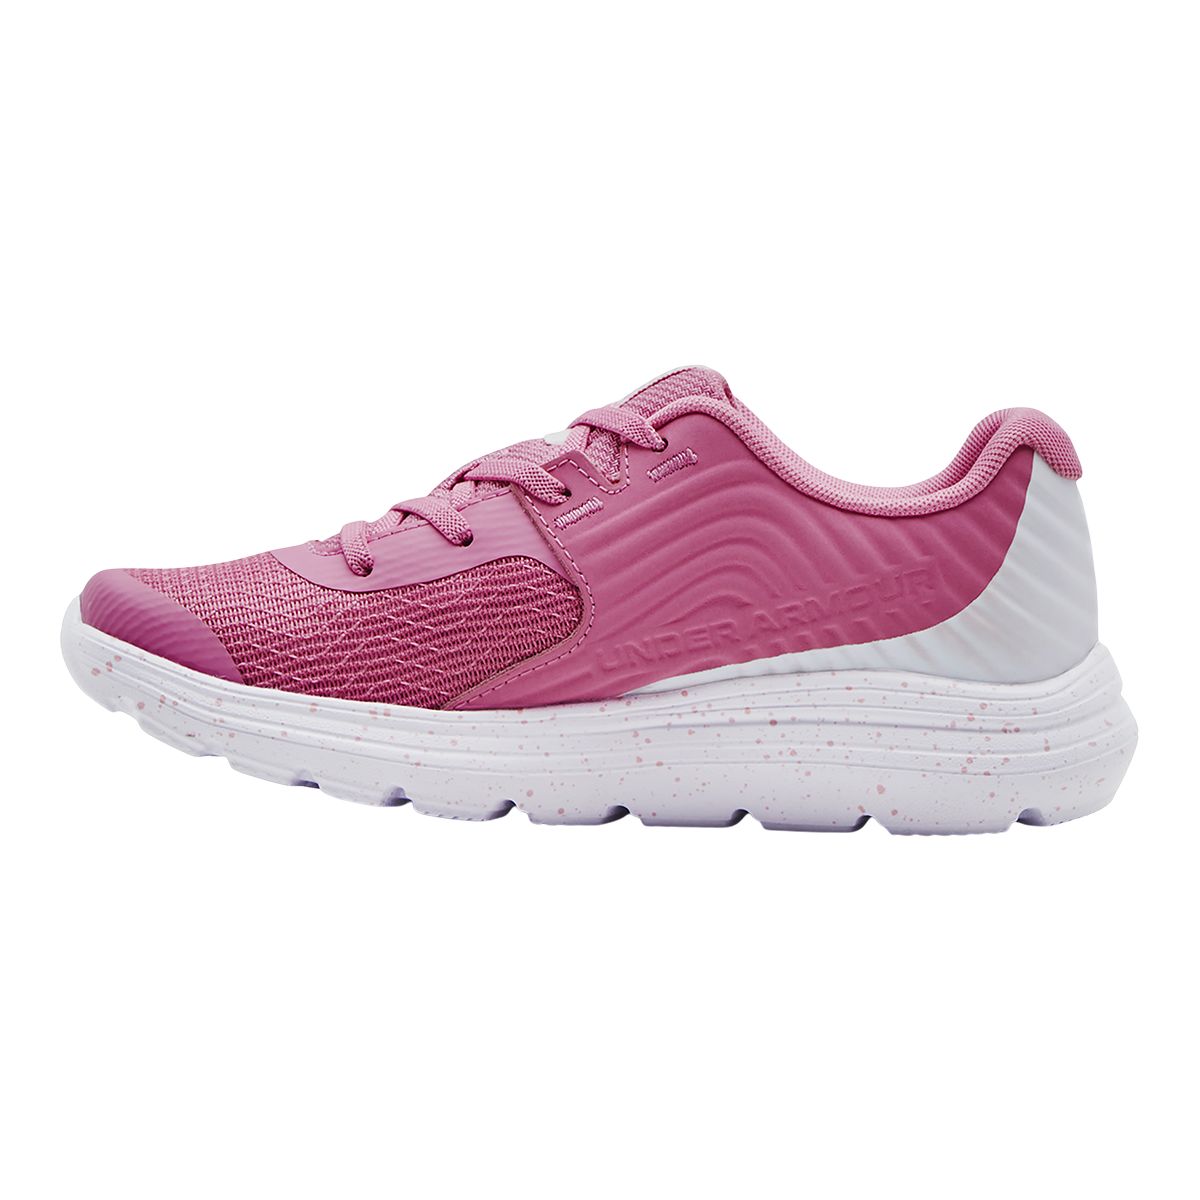 Under Armour Girls' Pre-School Outhustle Running Shoes